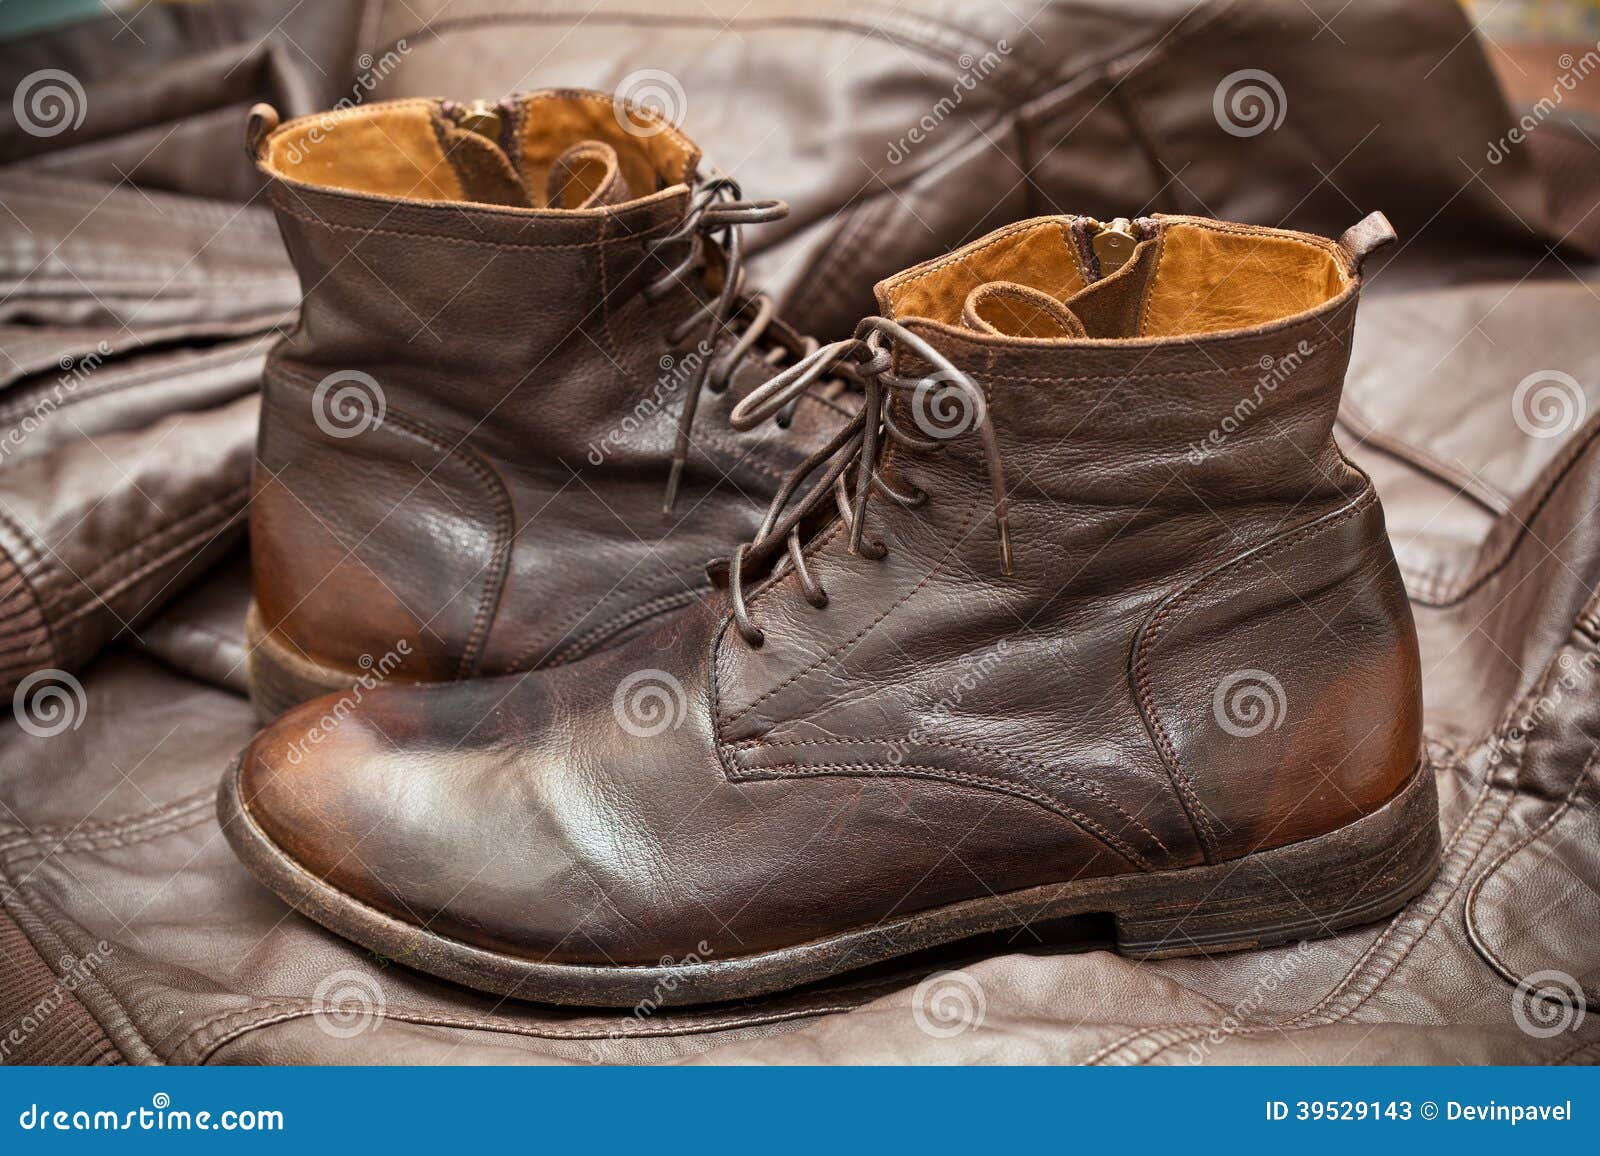 Leather Shoes Brown. Fashionable Leather High Boots Stock Image - Image ...